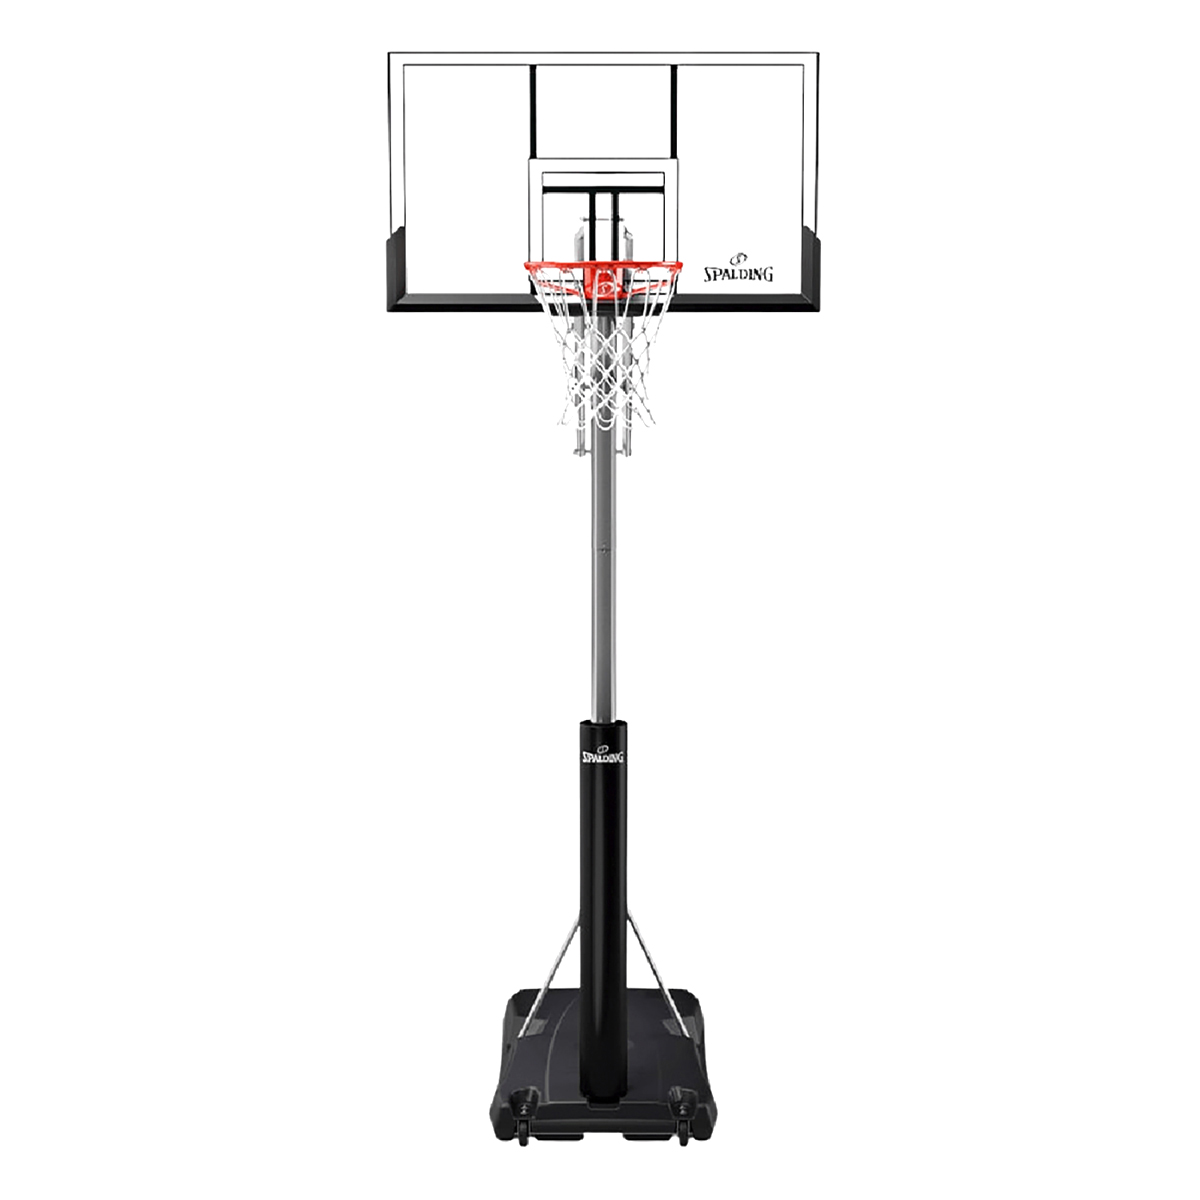 Tablero Basquet Spalding Silver,  image number null